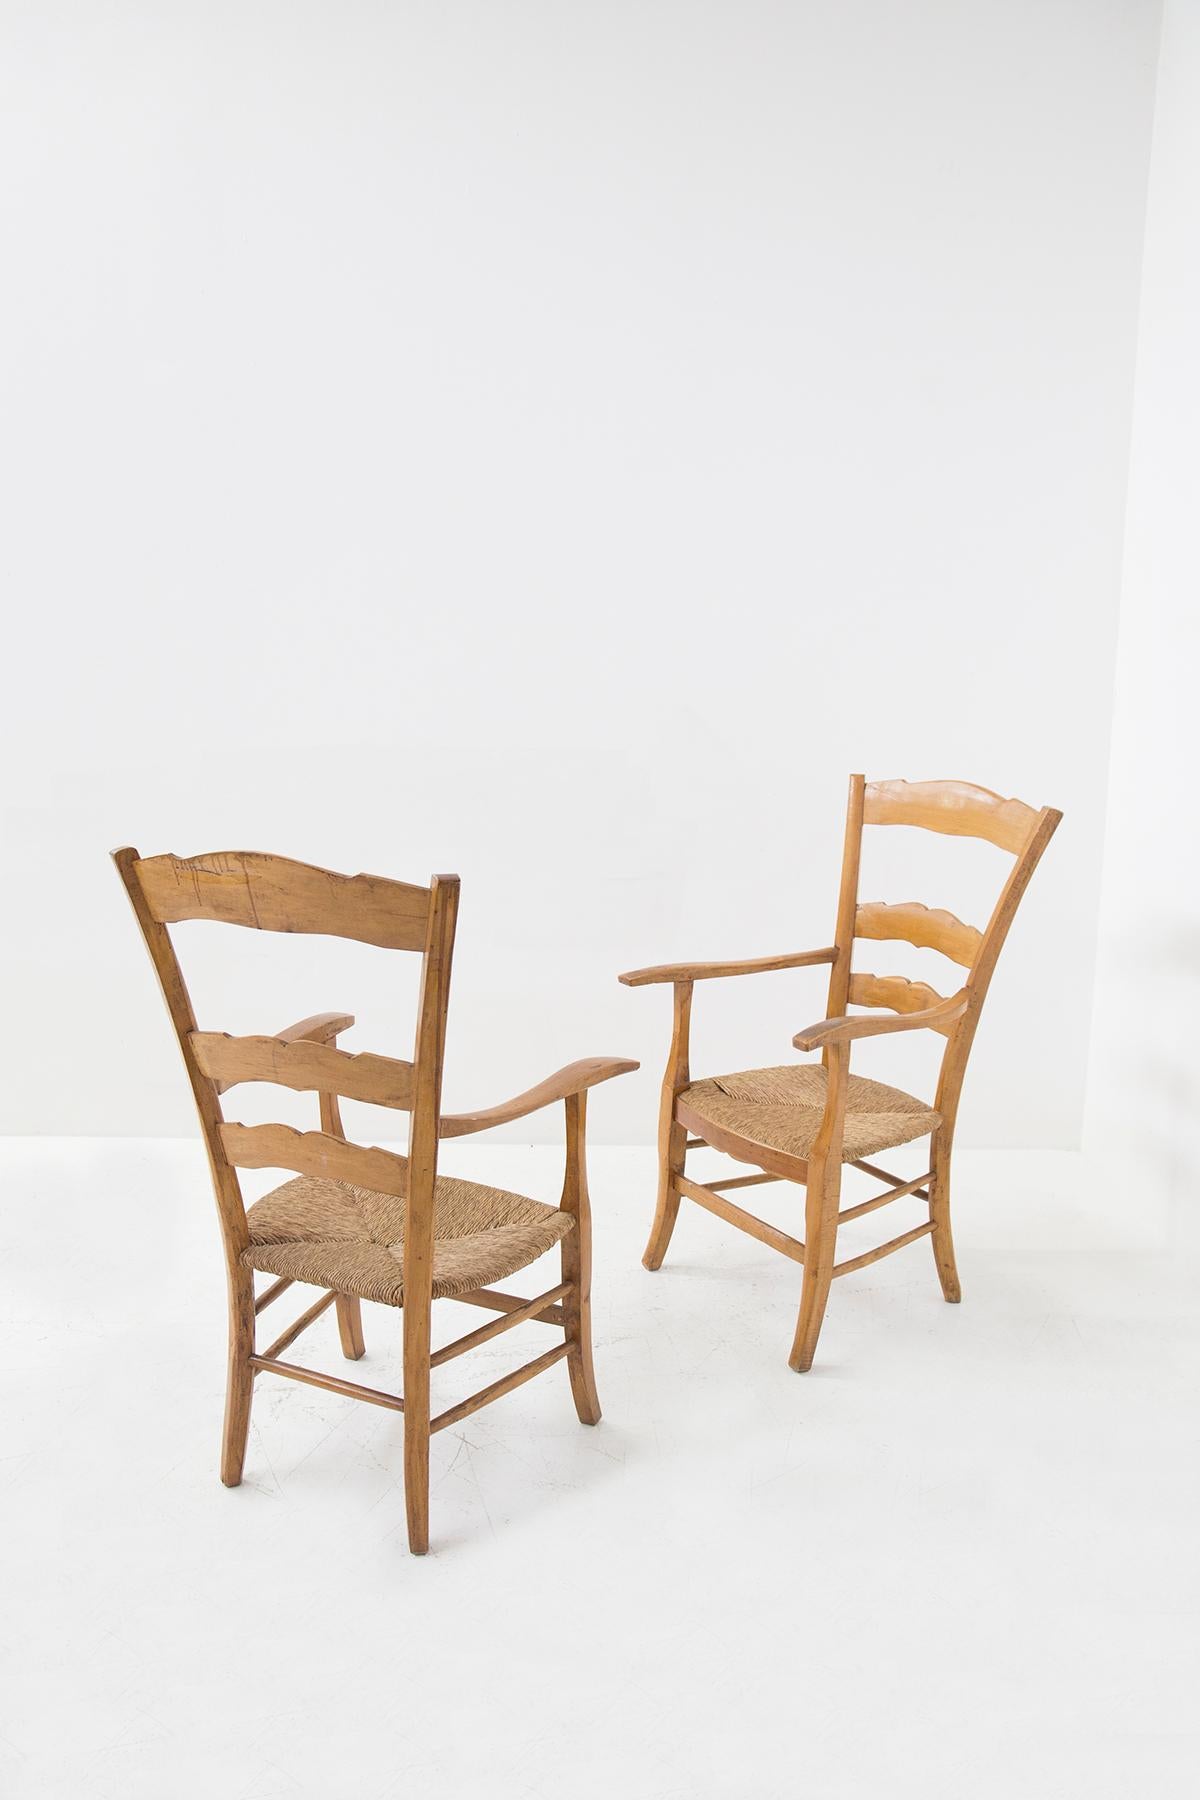 Paolo Buffa Two Head Chairs in Wood and Straw 'Attr.' For Sale 1